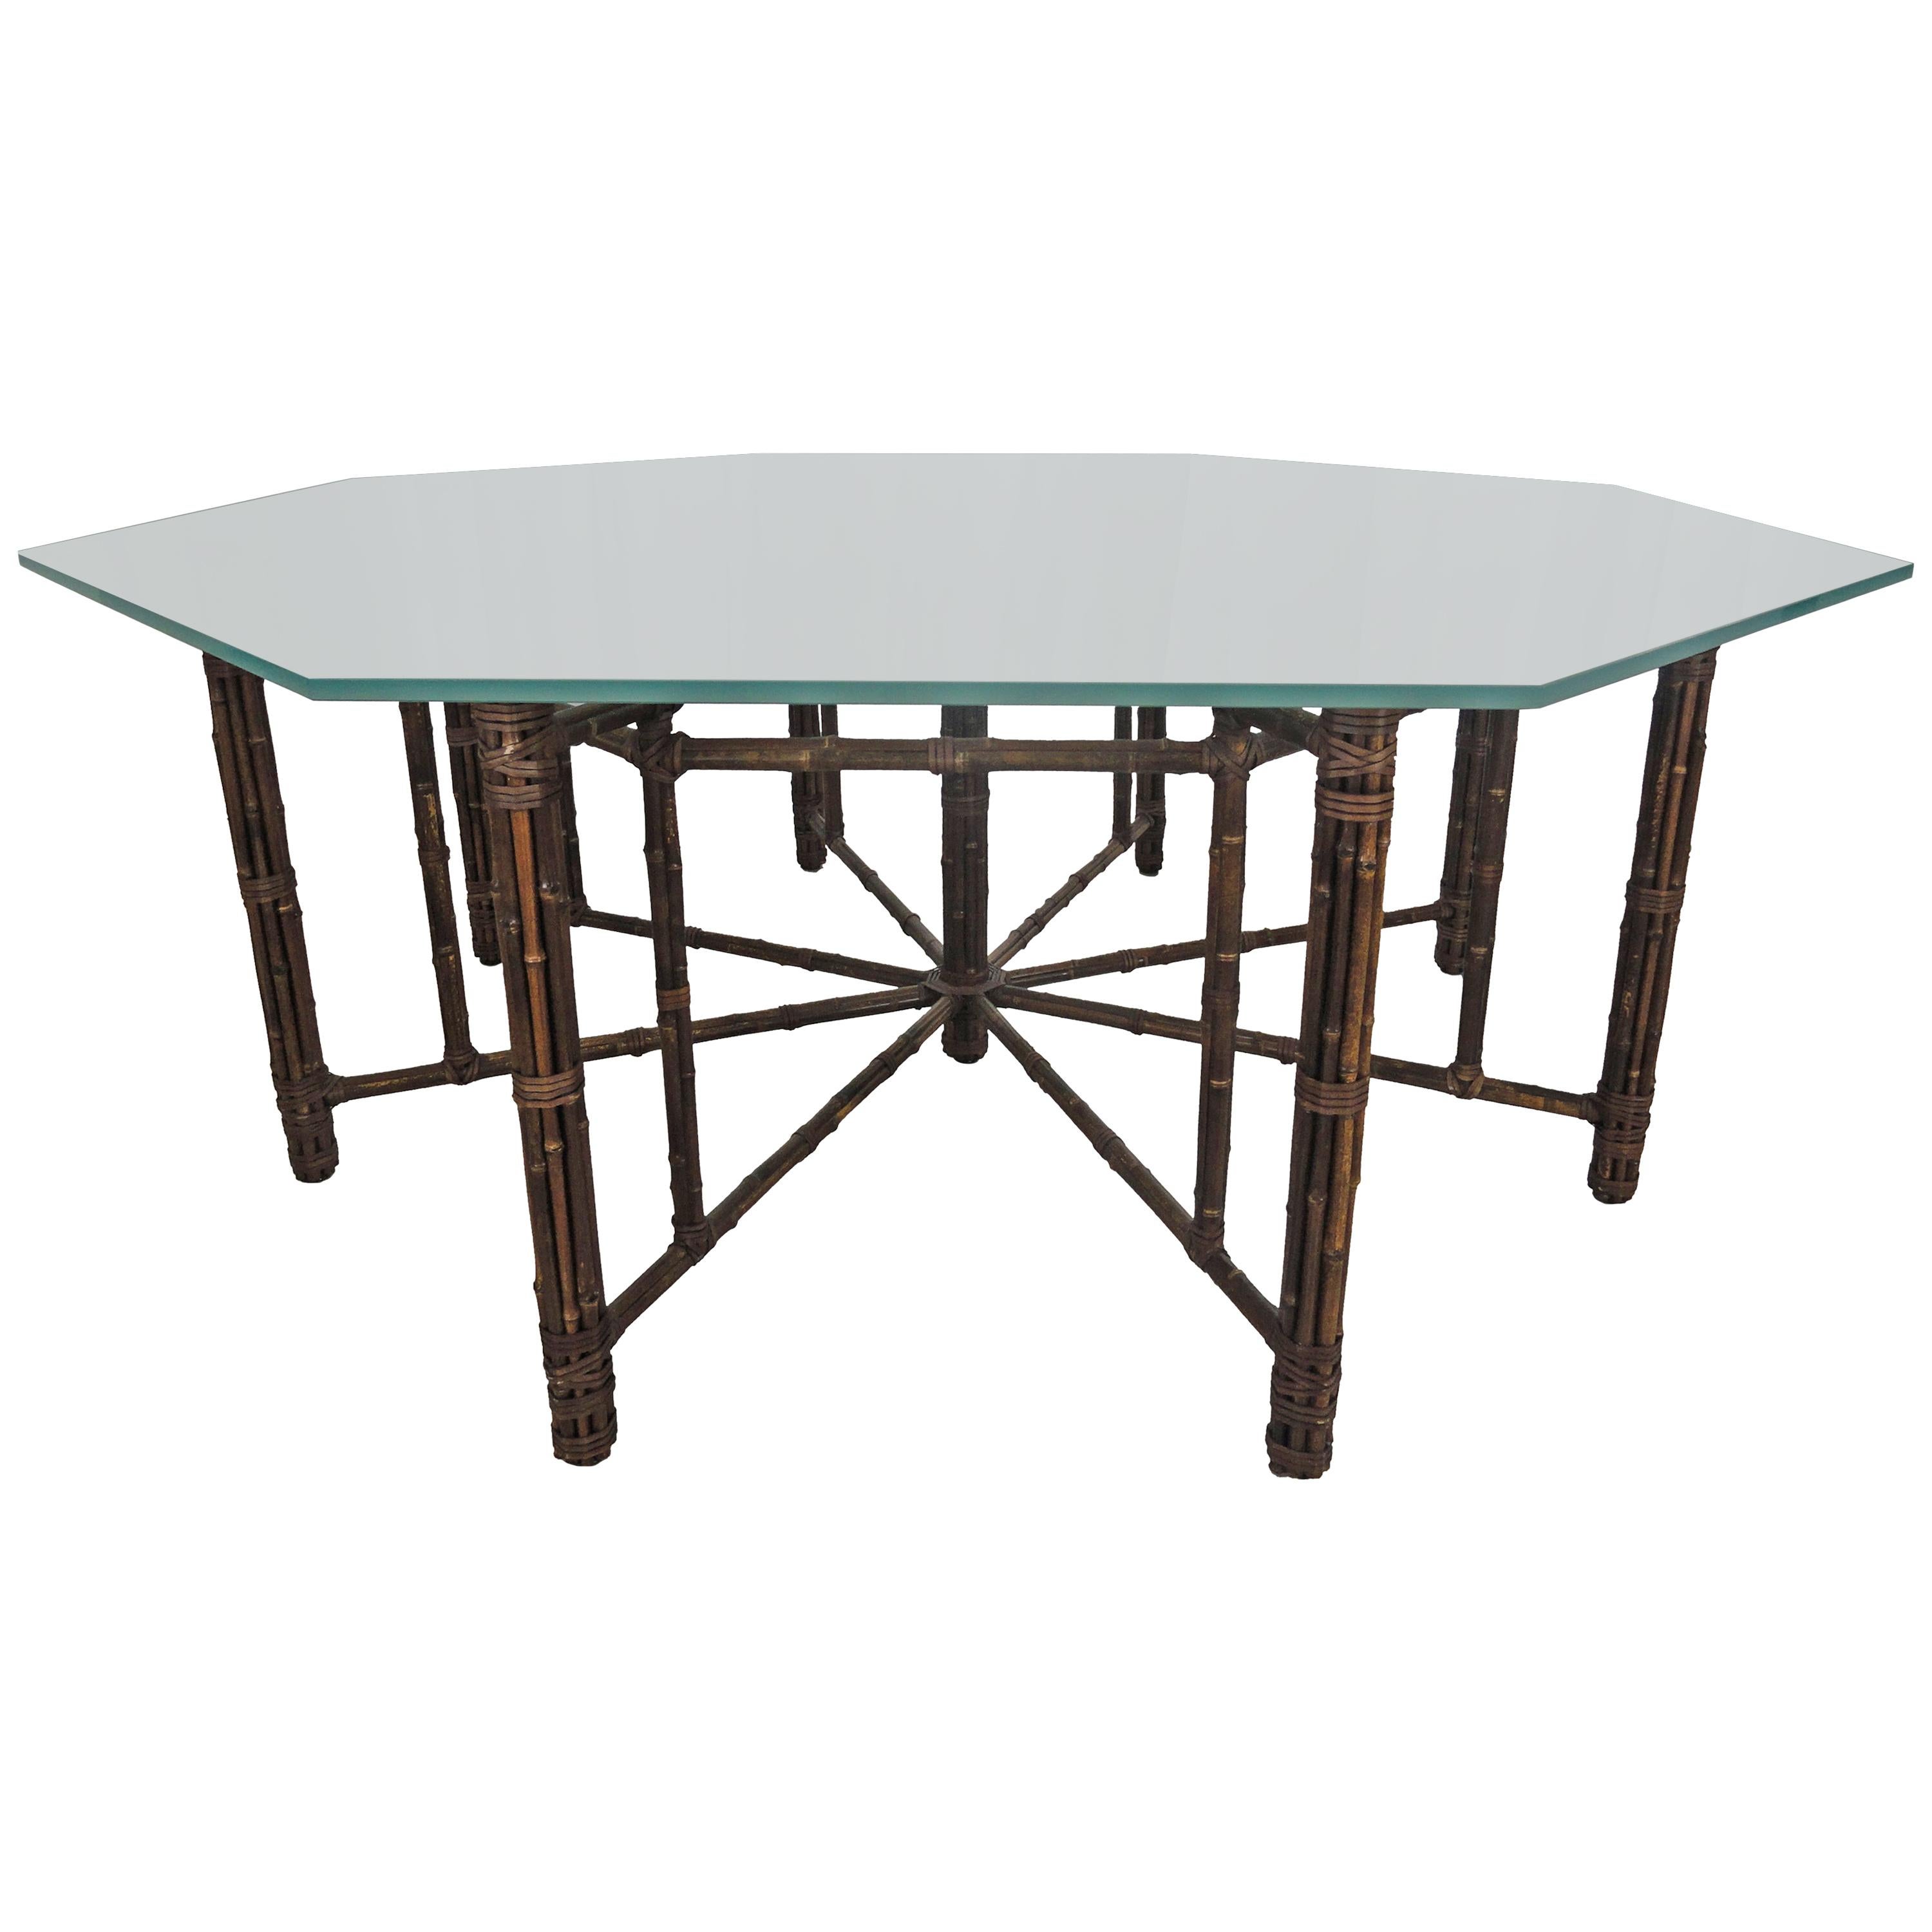 McGuire Octagonal Bamboo and Rattan Dining Table For Sale